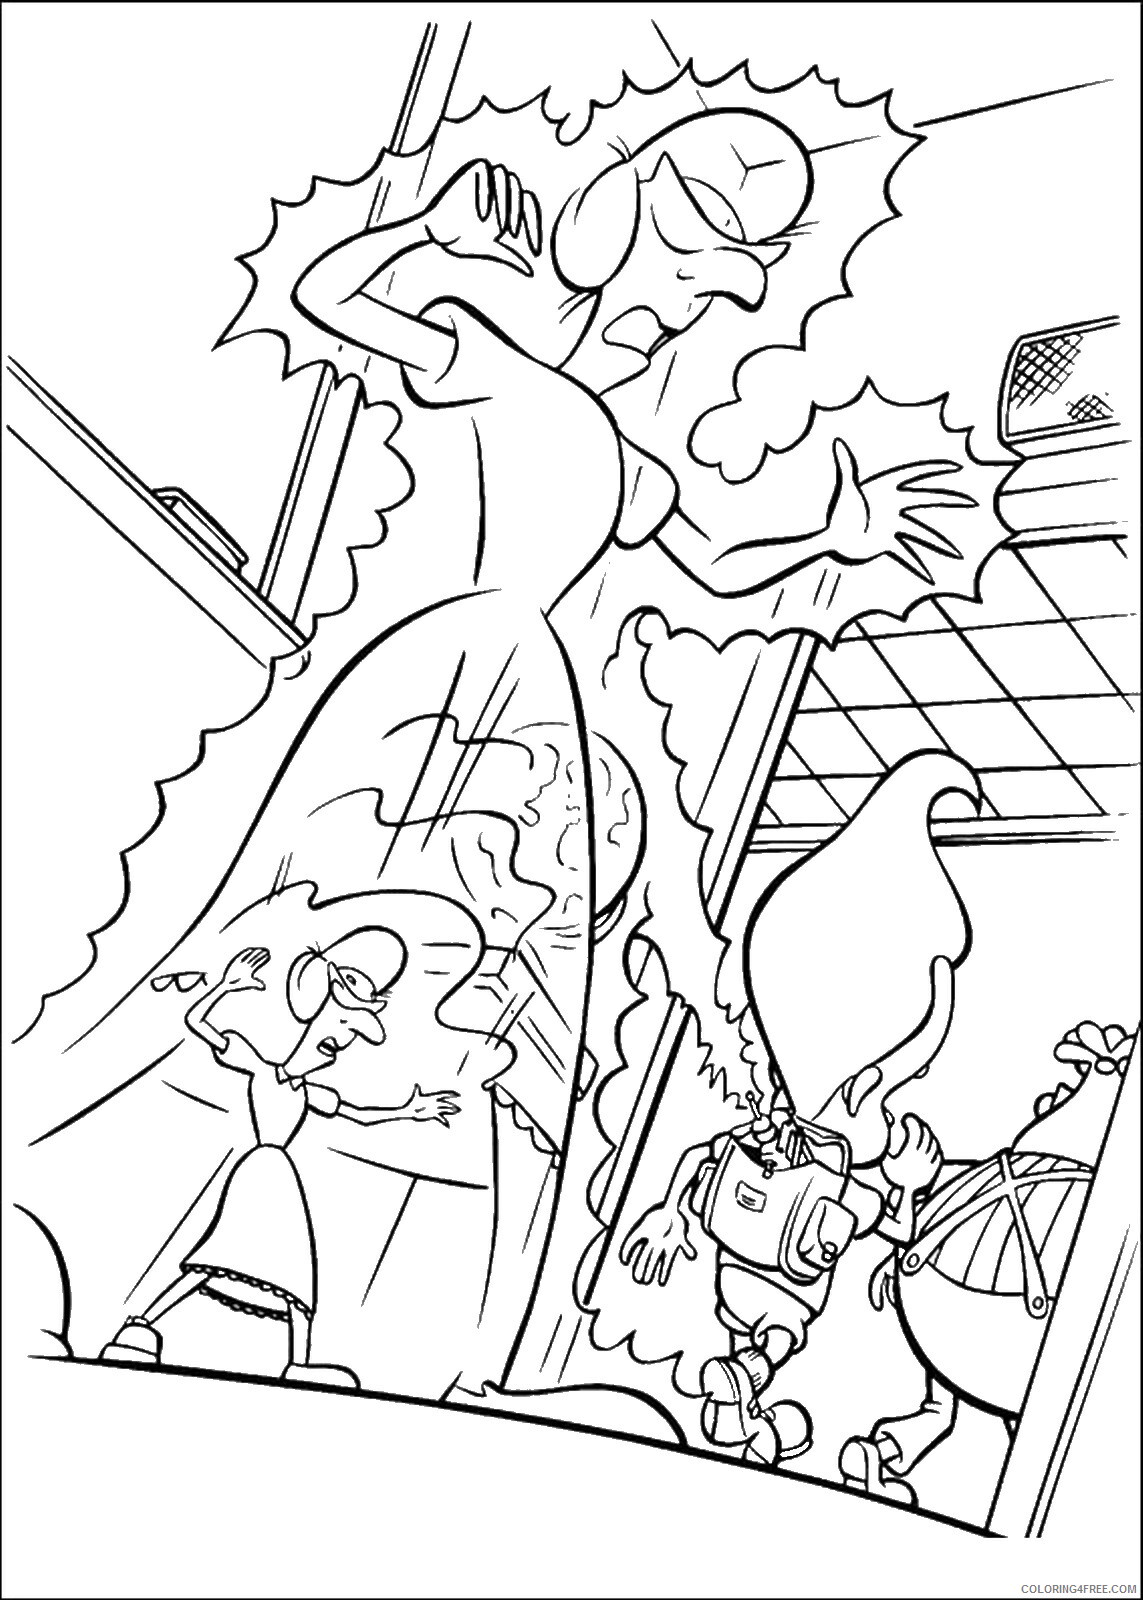 Jimmy Neutron Coloring Pages TV Film jimmy_neutron_cl07 Printable 2020 04125 Coloring4free